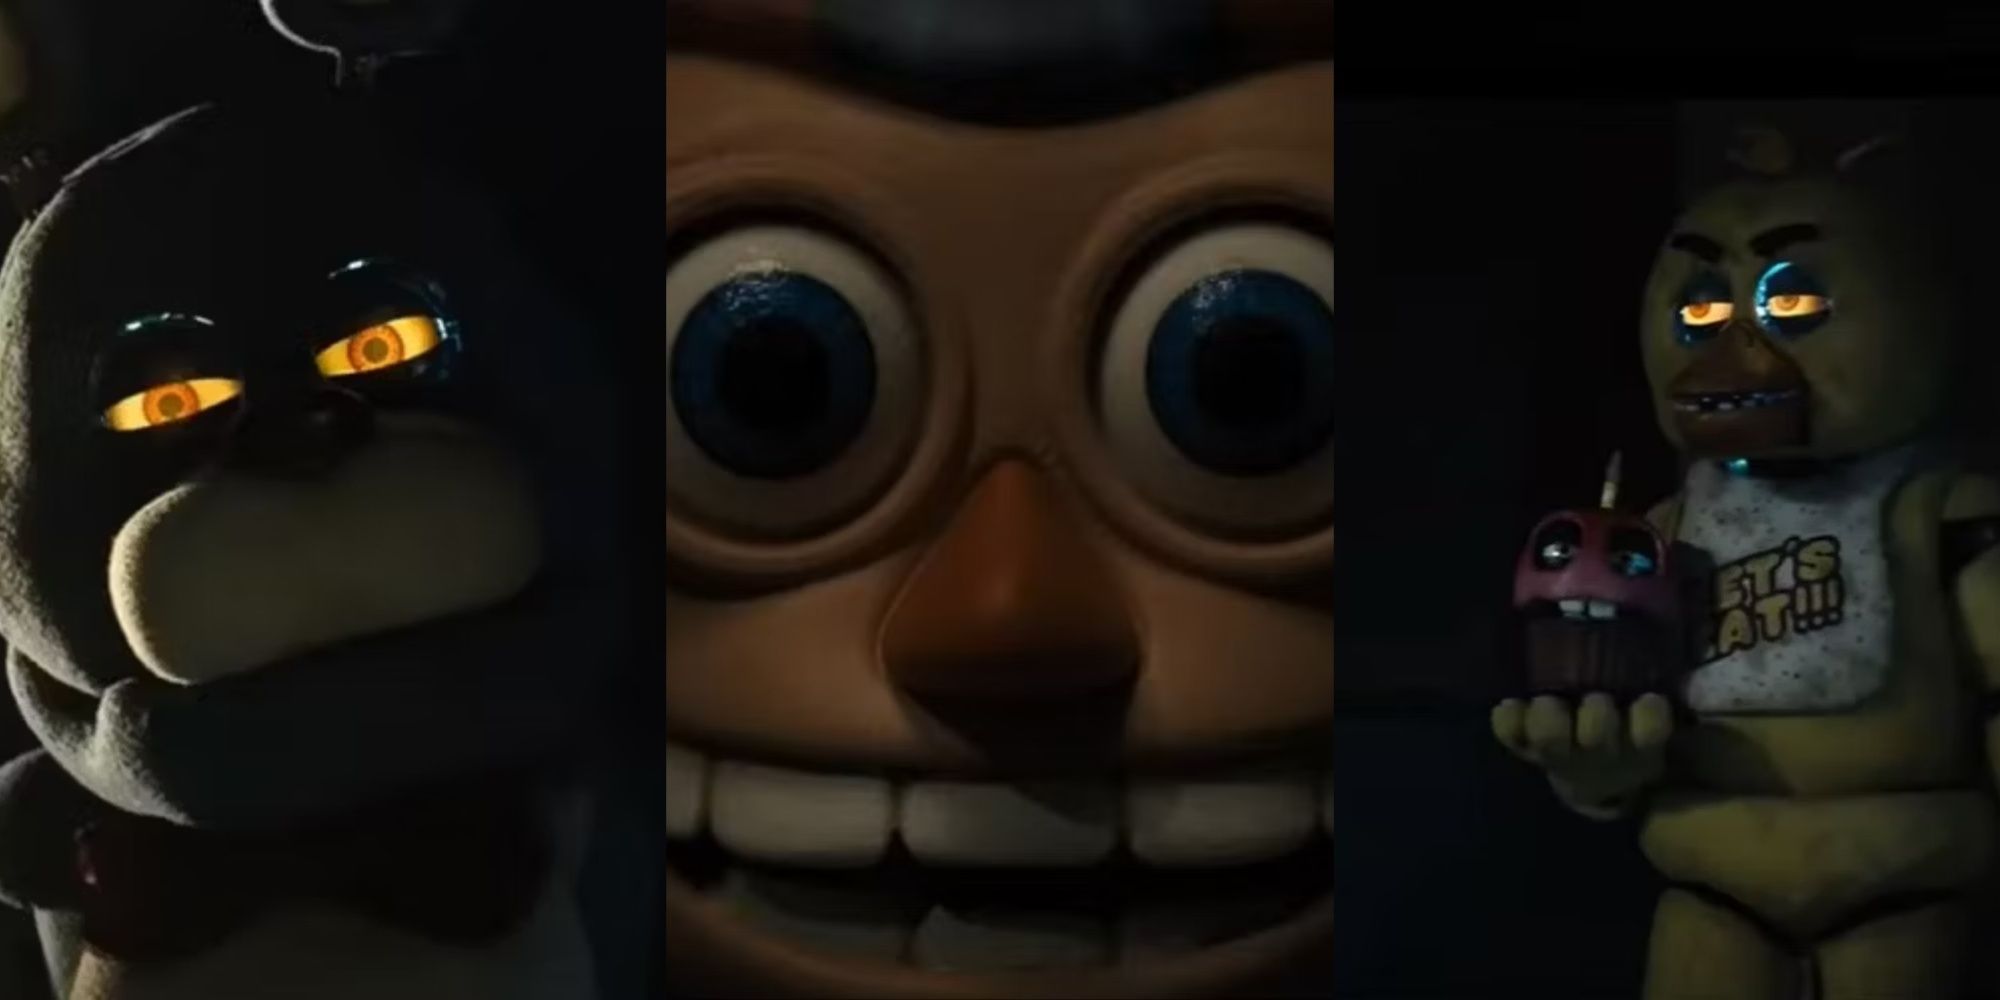 5 Exciting things about the Five Nights at Freddy's Movie